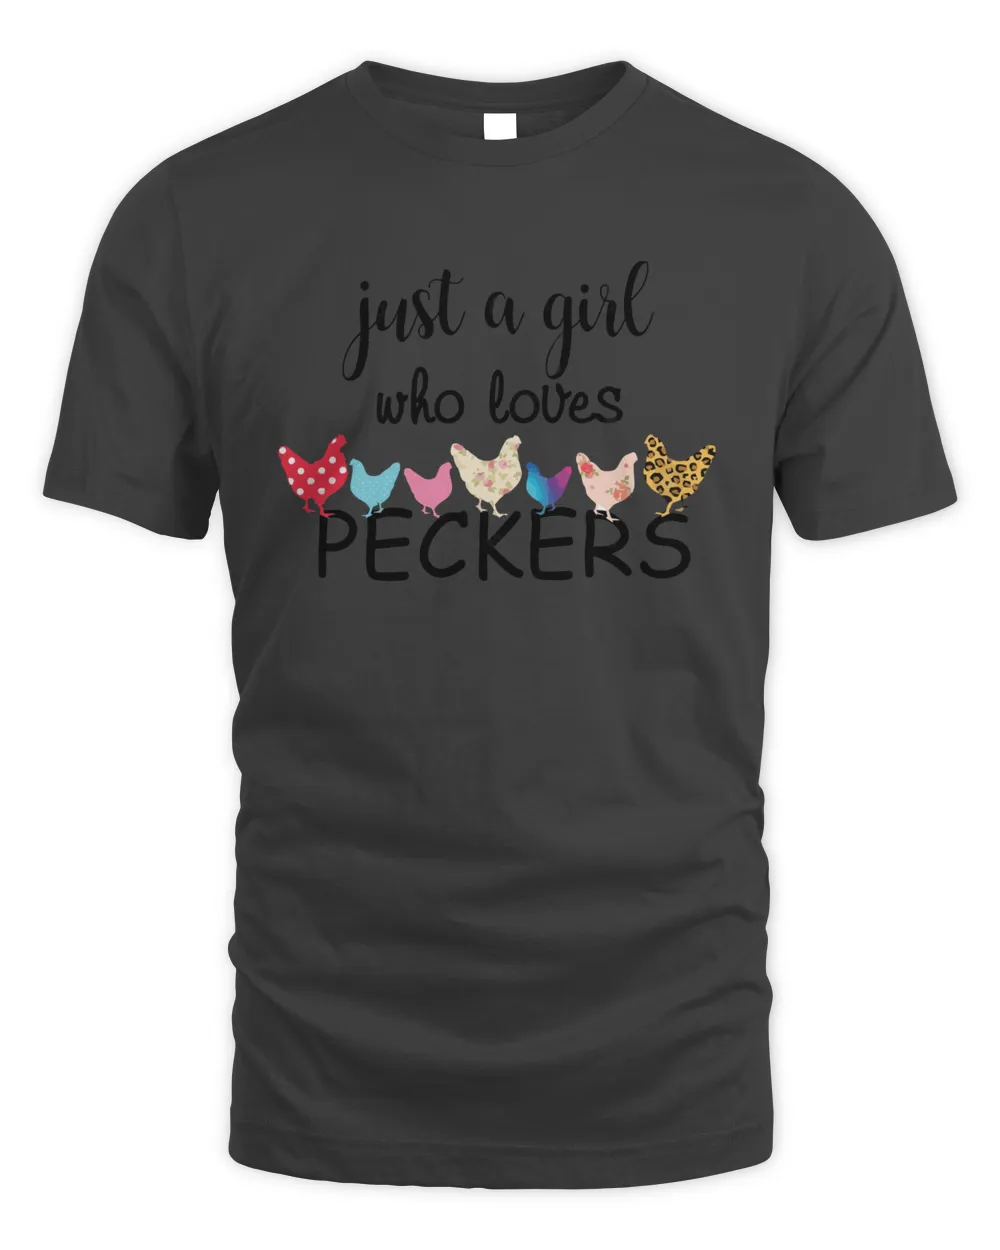 Just a girl who loves peckers